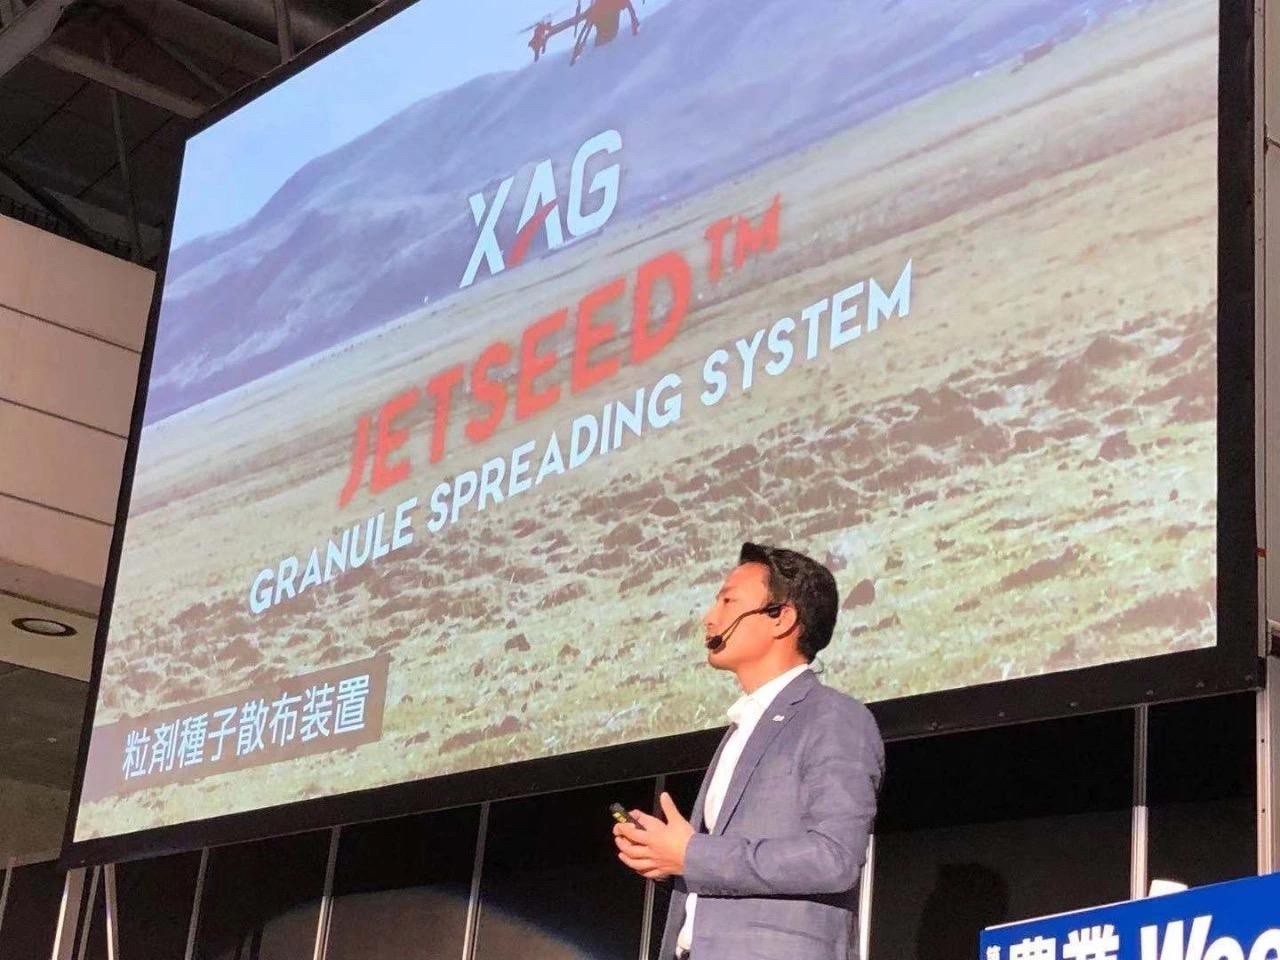 Justin Gong, Co-founder and Vice president of XAG